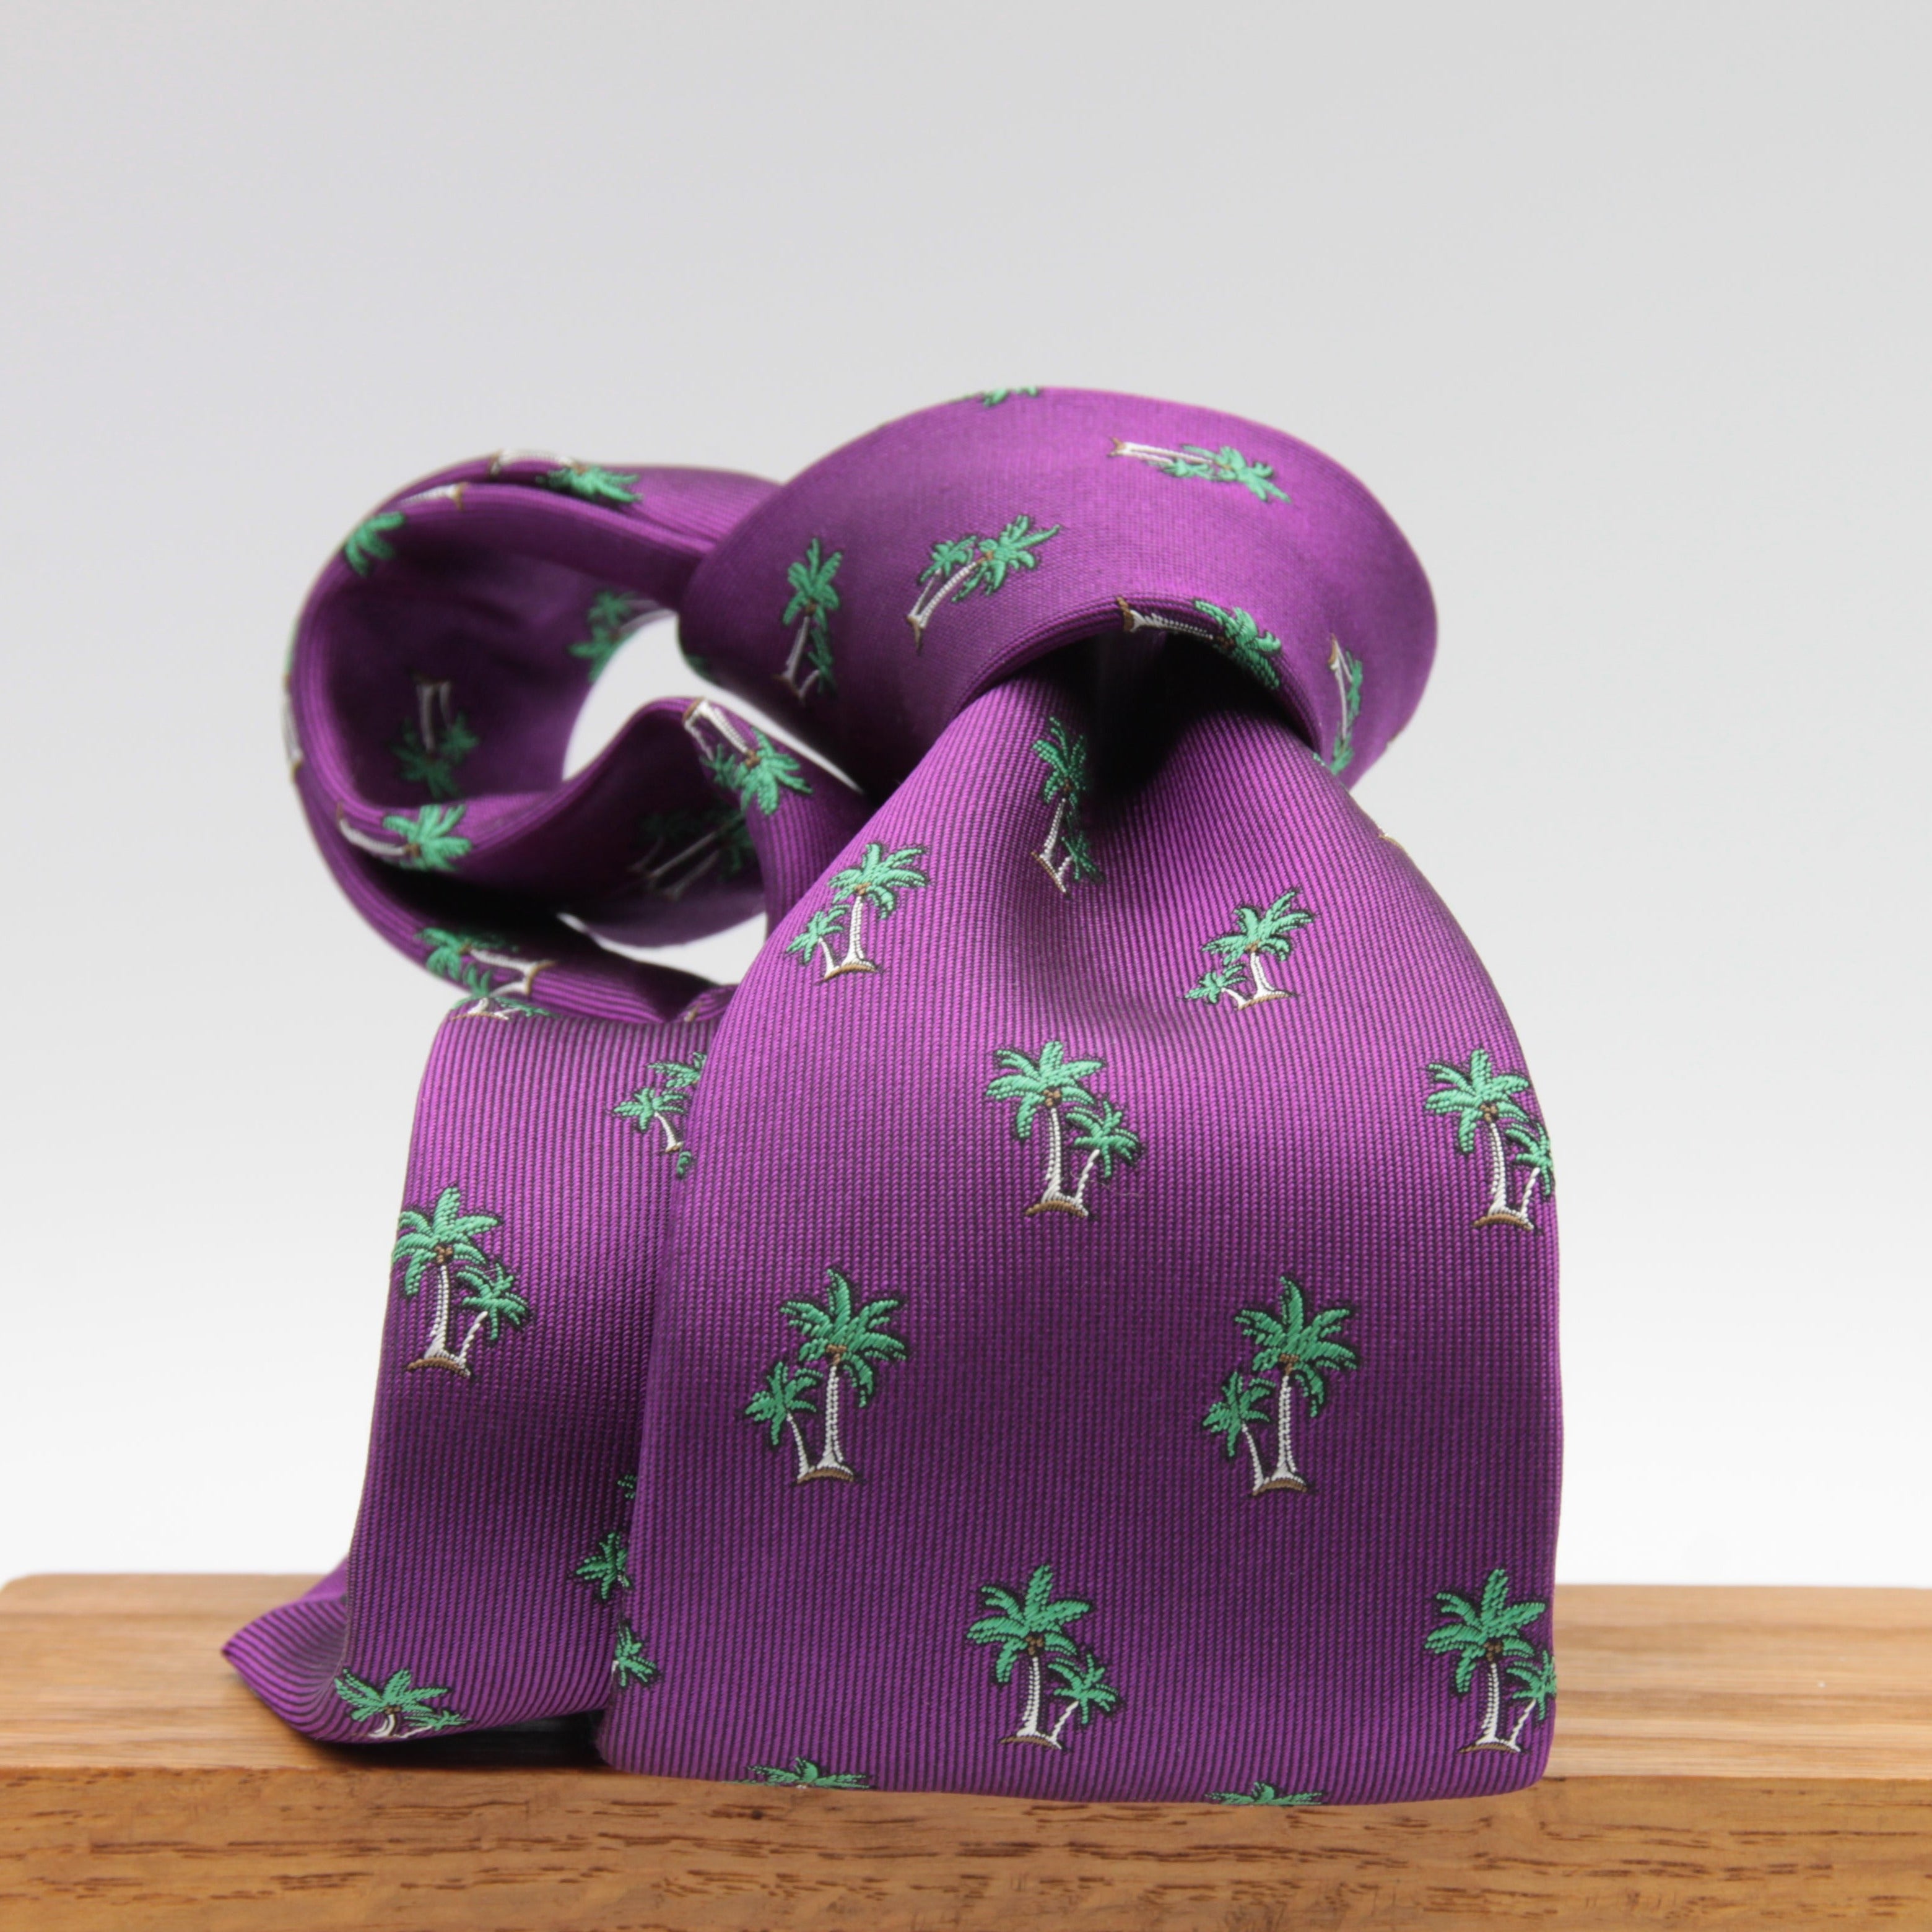 Drake's for Cruciani e Bella 100%  Woven Silk Tipped Fucsia, Green and White Palm Tree Motif Tie Handmade in London, England 8 cm x 150 cm #6883